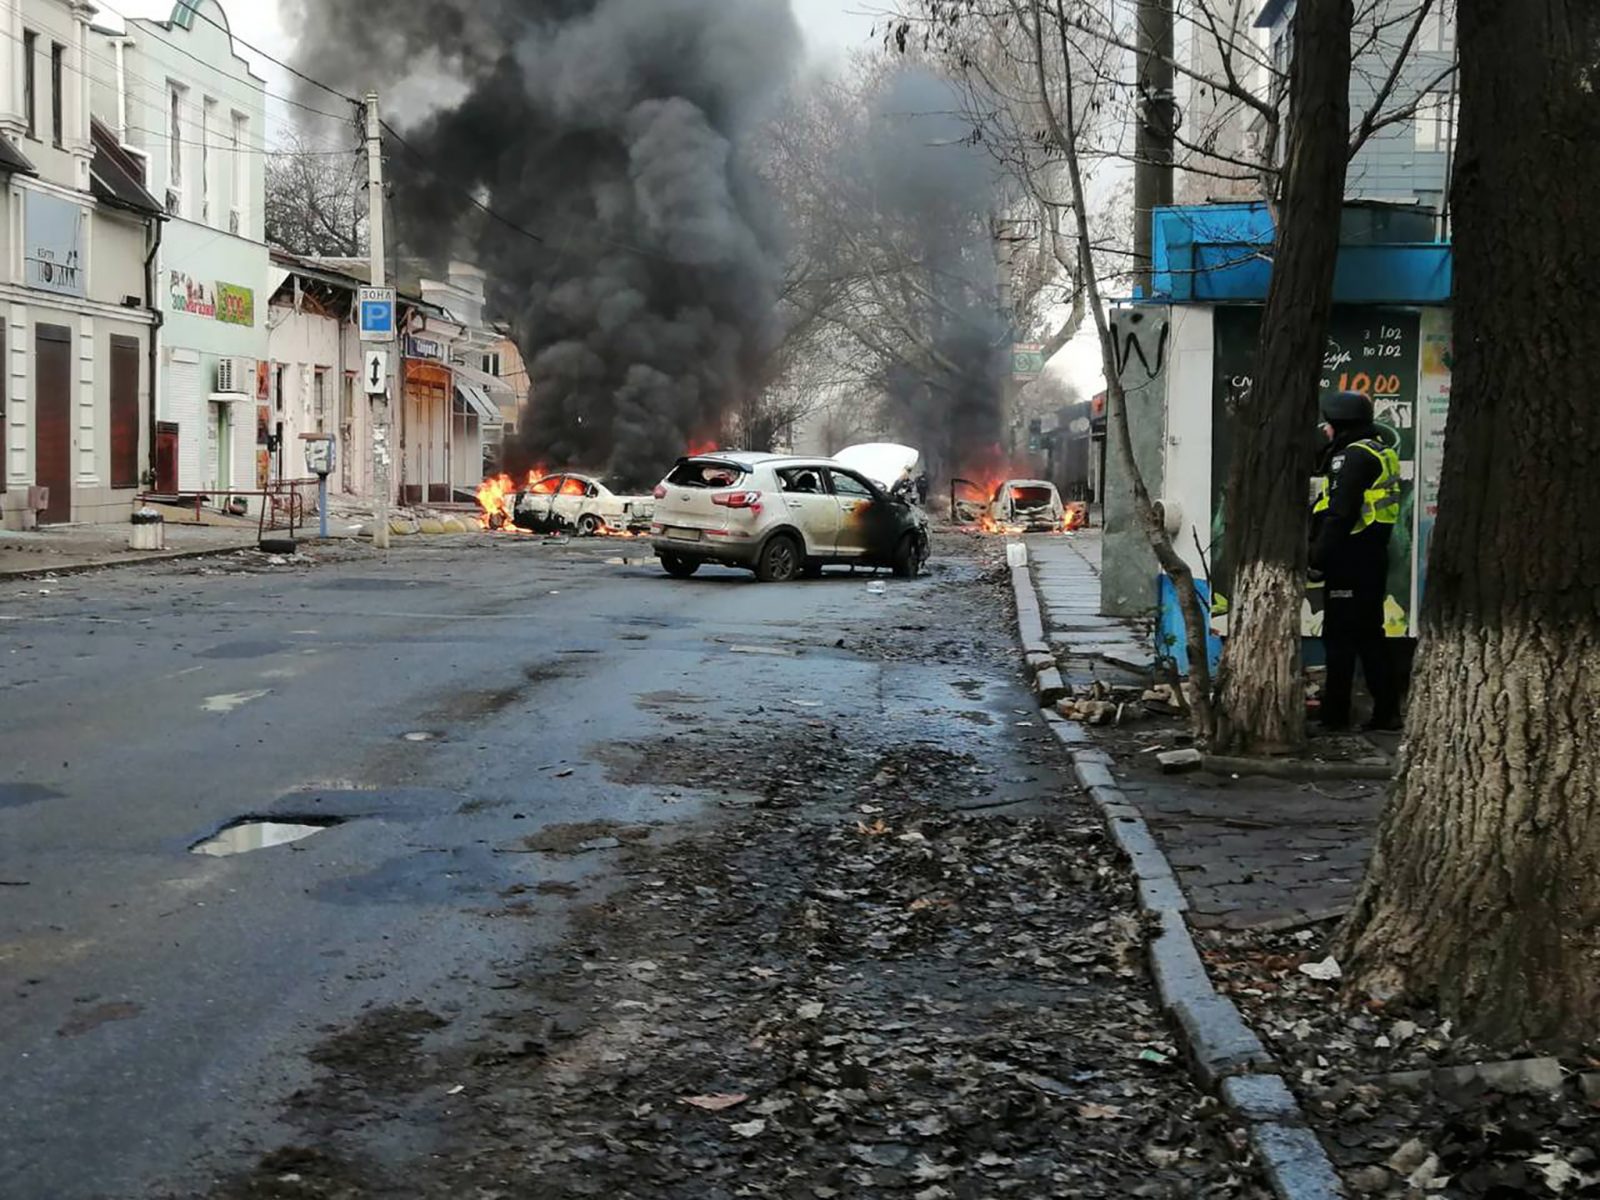 epa10377632 A handout photo released by the press service of the State Emergency Service (SES) of Ukraine shows cars burning on a street after shelling hit Kherson, southern Ukraine, 24 December 2022, amid Russia's invasion. At least seven people were killed and 58 others injured after Russian strikes targeted the southern Ukrainian city on 24 December, the head of the Kherson regional military administration, Yaroslav Yanushevich wrote on telegram. Russian troops entered Ukraine on 24 February 2022 starting a conflict that has provoked destruction and a humanitarian crisis.  EPA/STATE EMERGENCY SERVICE OF UKRAINE HANDOUT -- BEST QUALITY AVAILABLE -- MANDATORY CREDIT: STATE EMERGENCY SERVICE OF UKRAINE --